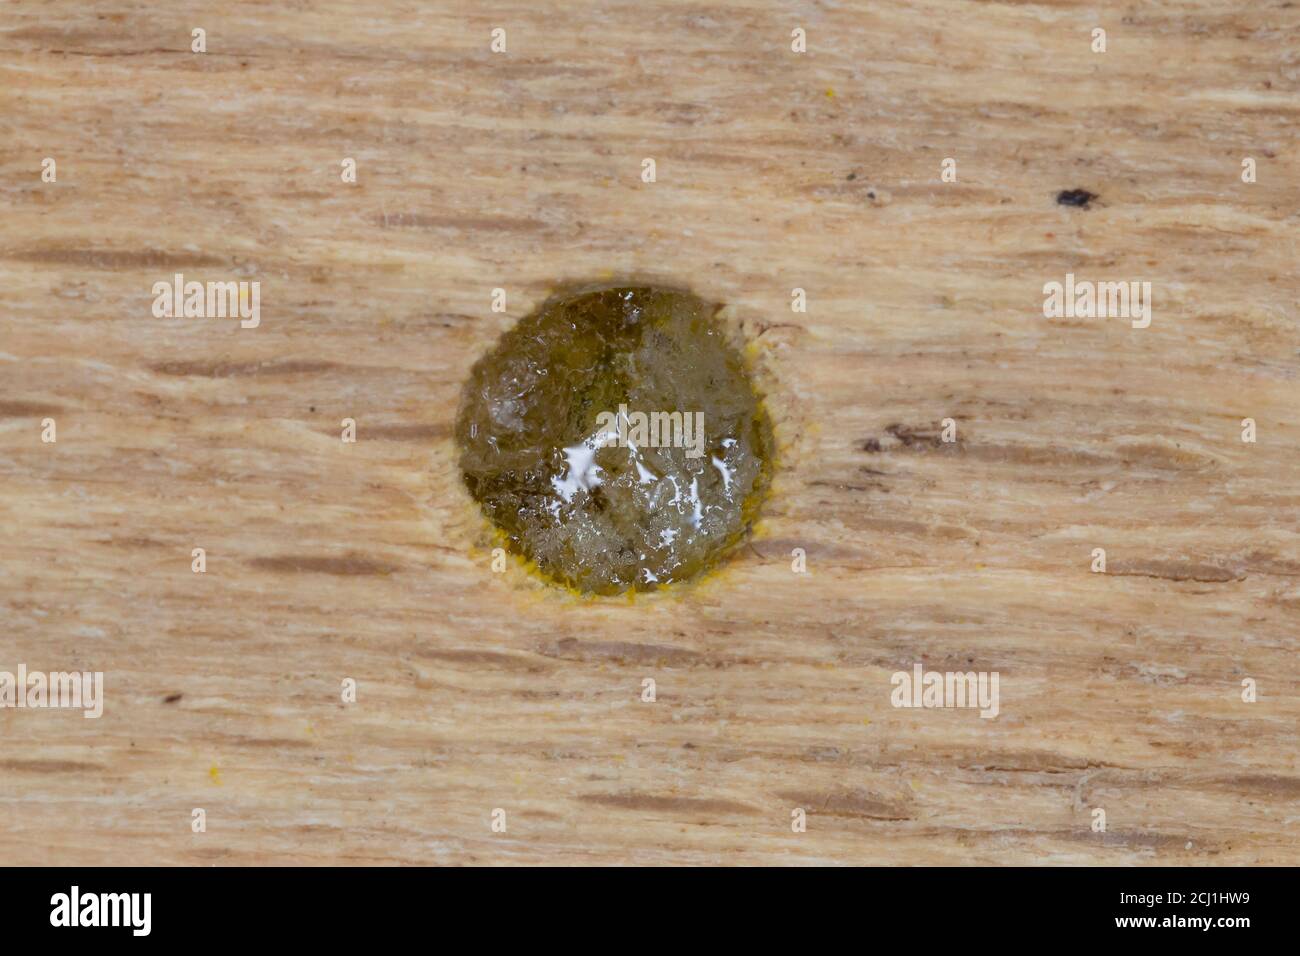 Heriades (Heriades truncorum, Osmia truncorum), seal of the nest, opening is closed wit resin, Germany Stock Photo